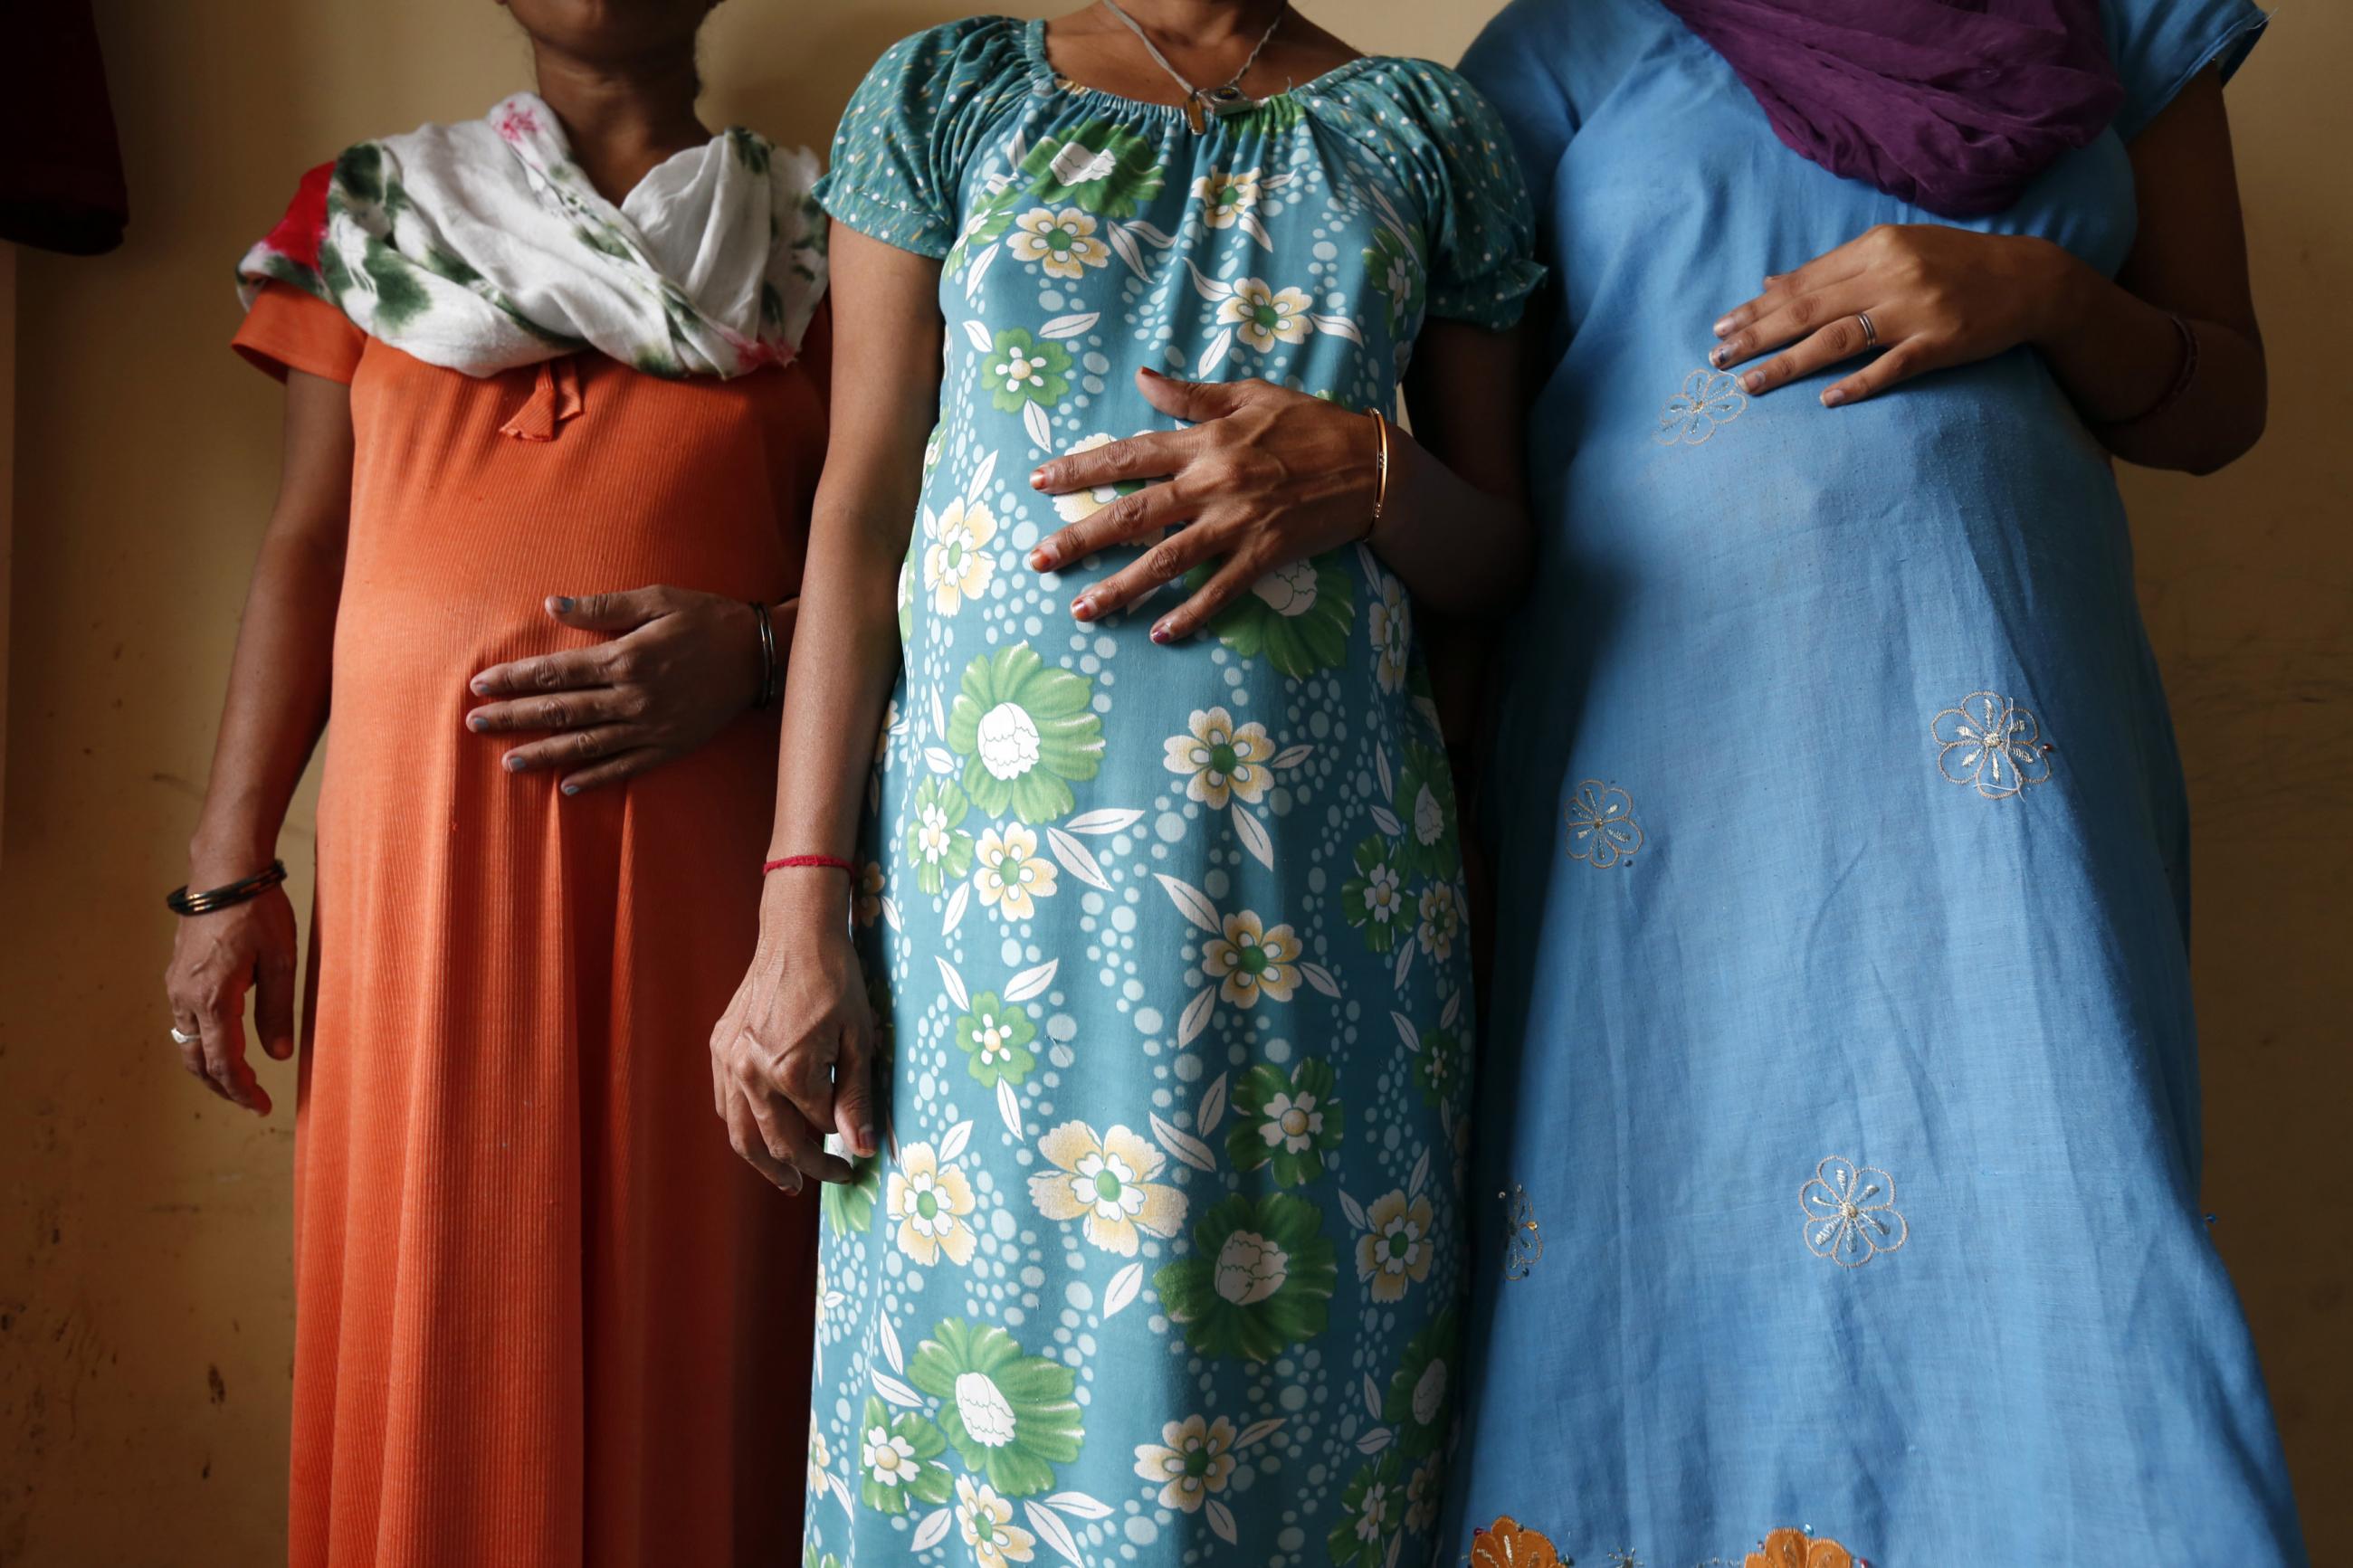 Three pregnant women—Daksha, Renuka, and Rajia—all surrogate mothers, pose wearing colorful dresses for a photo in Anand, a town about 70 km (44 miles) south of Ahmedabad, India,